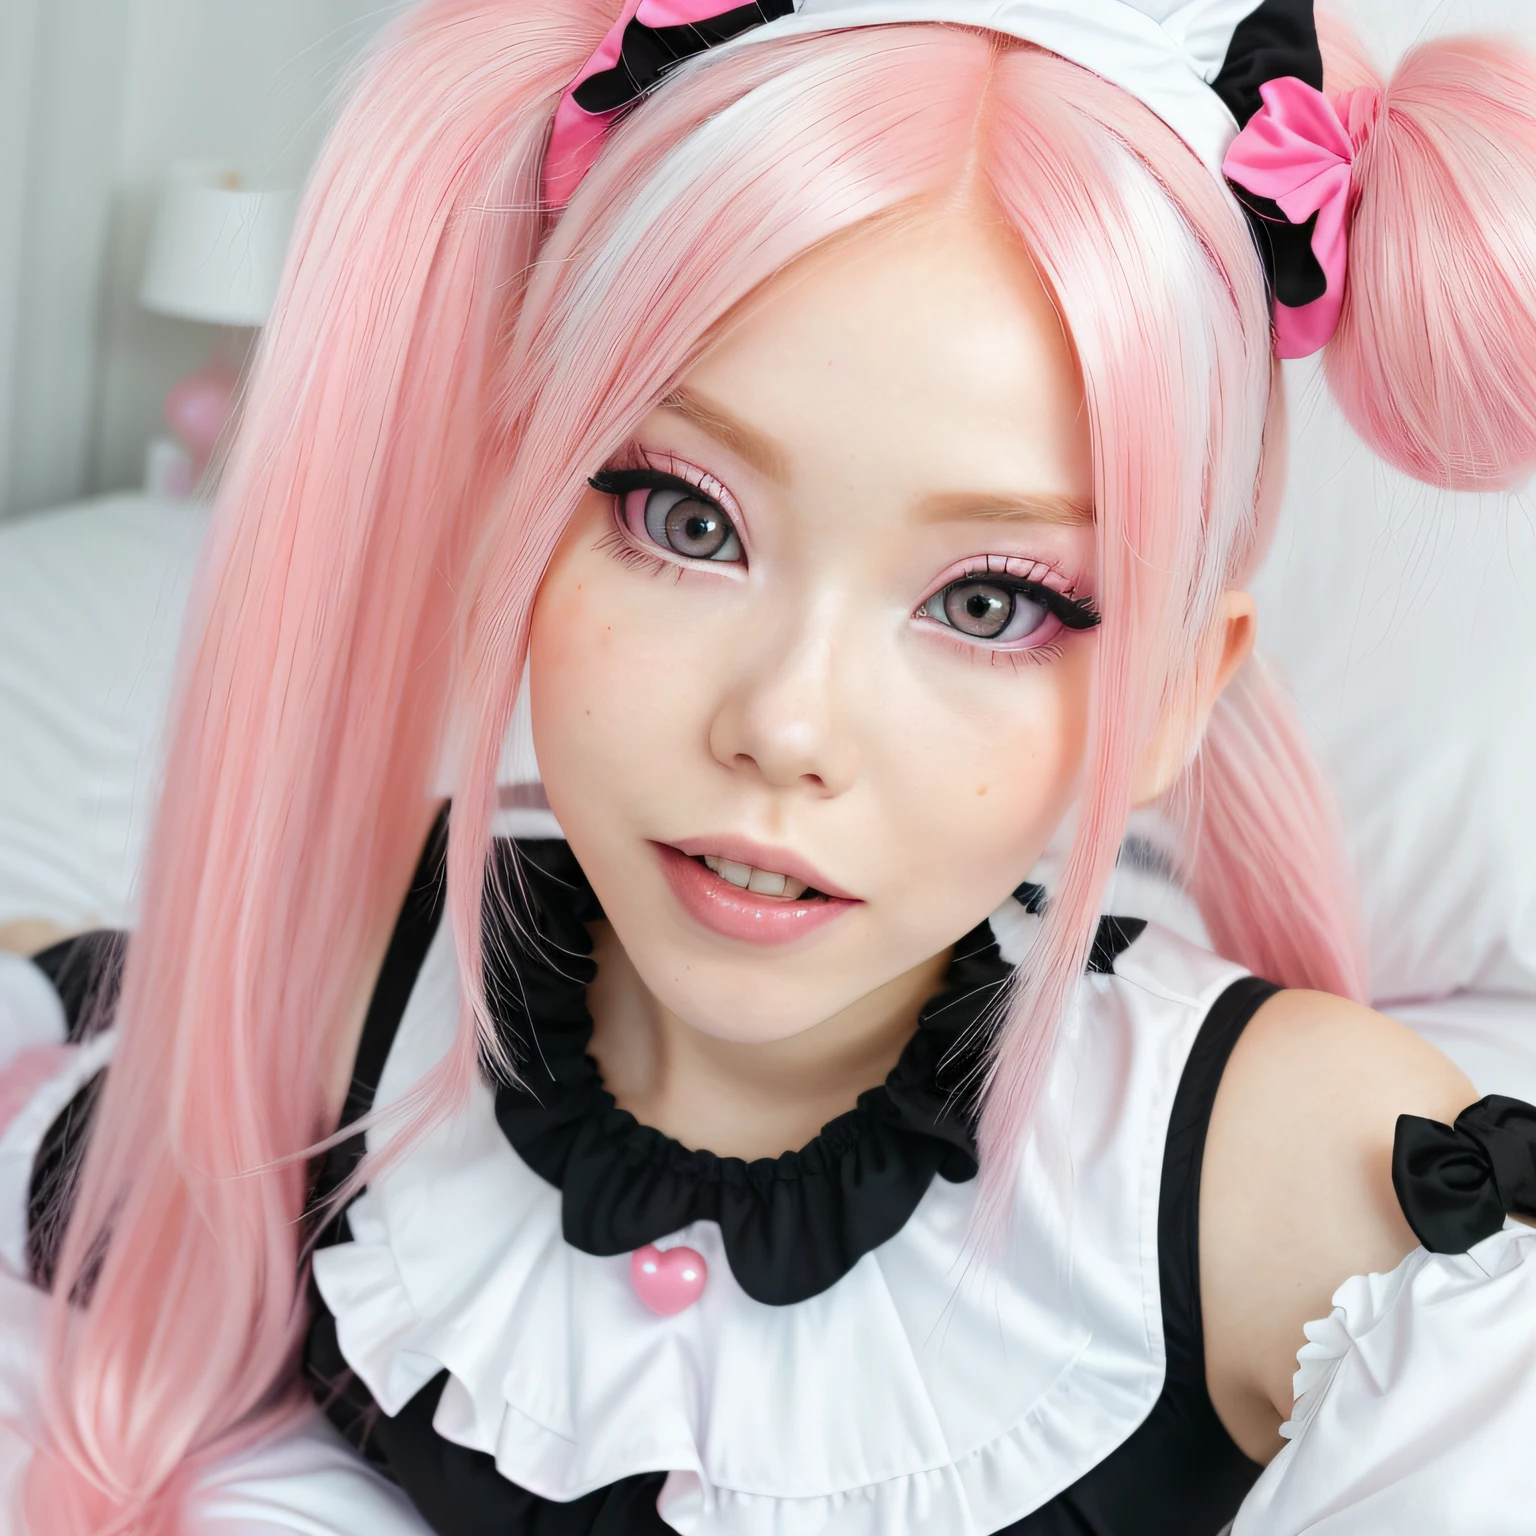 Pink haired woman in a white and black outfit laying on a bed, belle delphine, ahegao, anime vibes, ahegao face, anime barbie in white stockings, shikamimi, webcam footage, highly realistic. live cam, y 2 k cutecore clowncore, pink twintail hair and cyan eyes, blonde hair and large eyes, low quality video